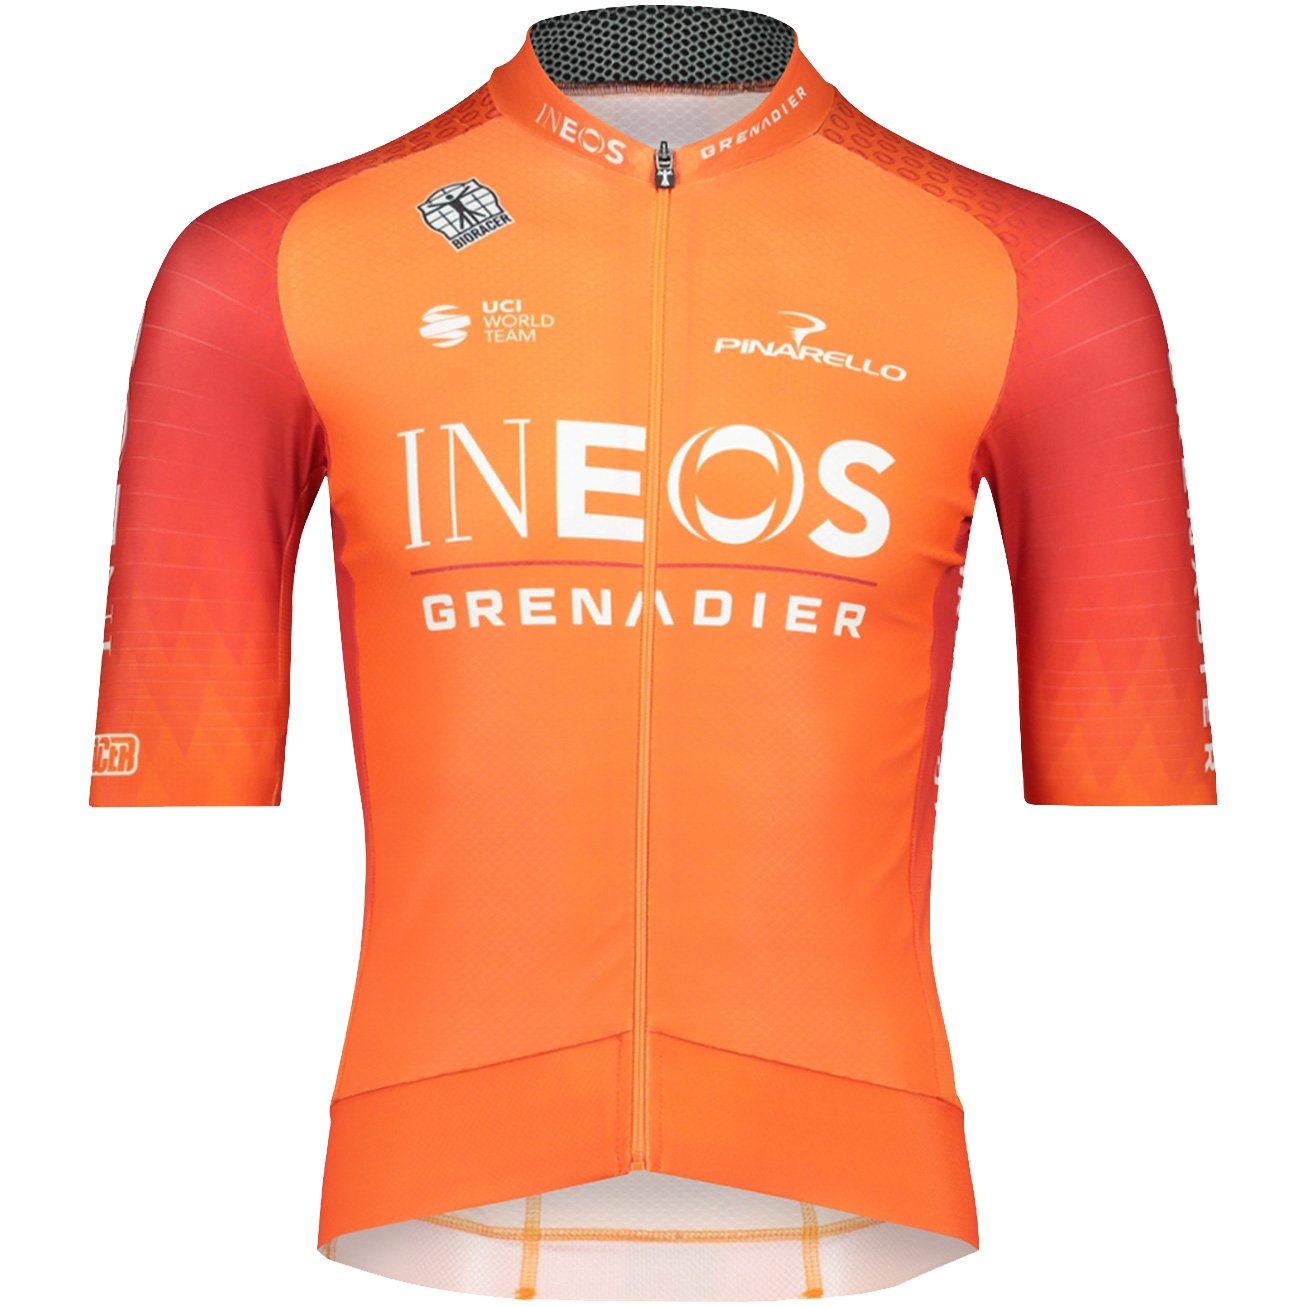 INEOS Grenadiers Race Epic Training 2022 Short Sleeve Jersey, for men, size 2XL, Cycle shirt, Bike gear